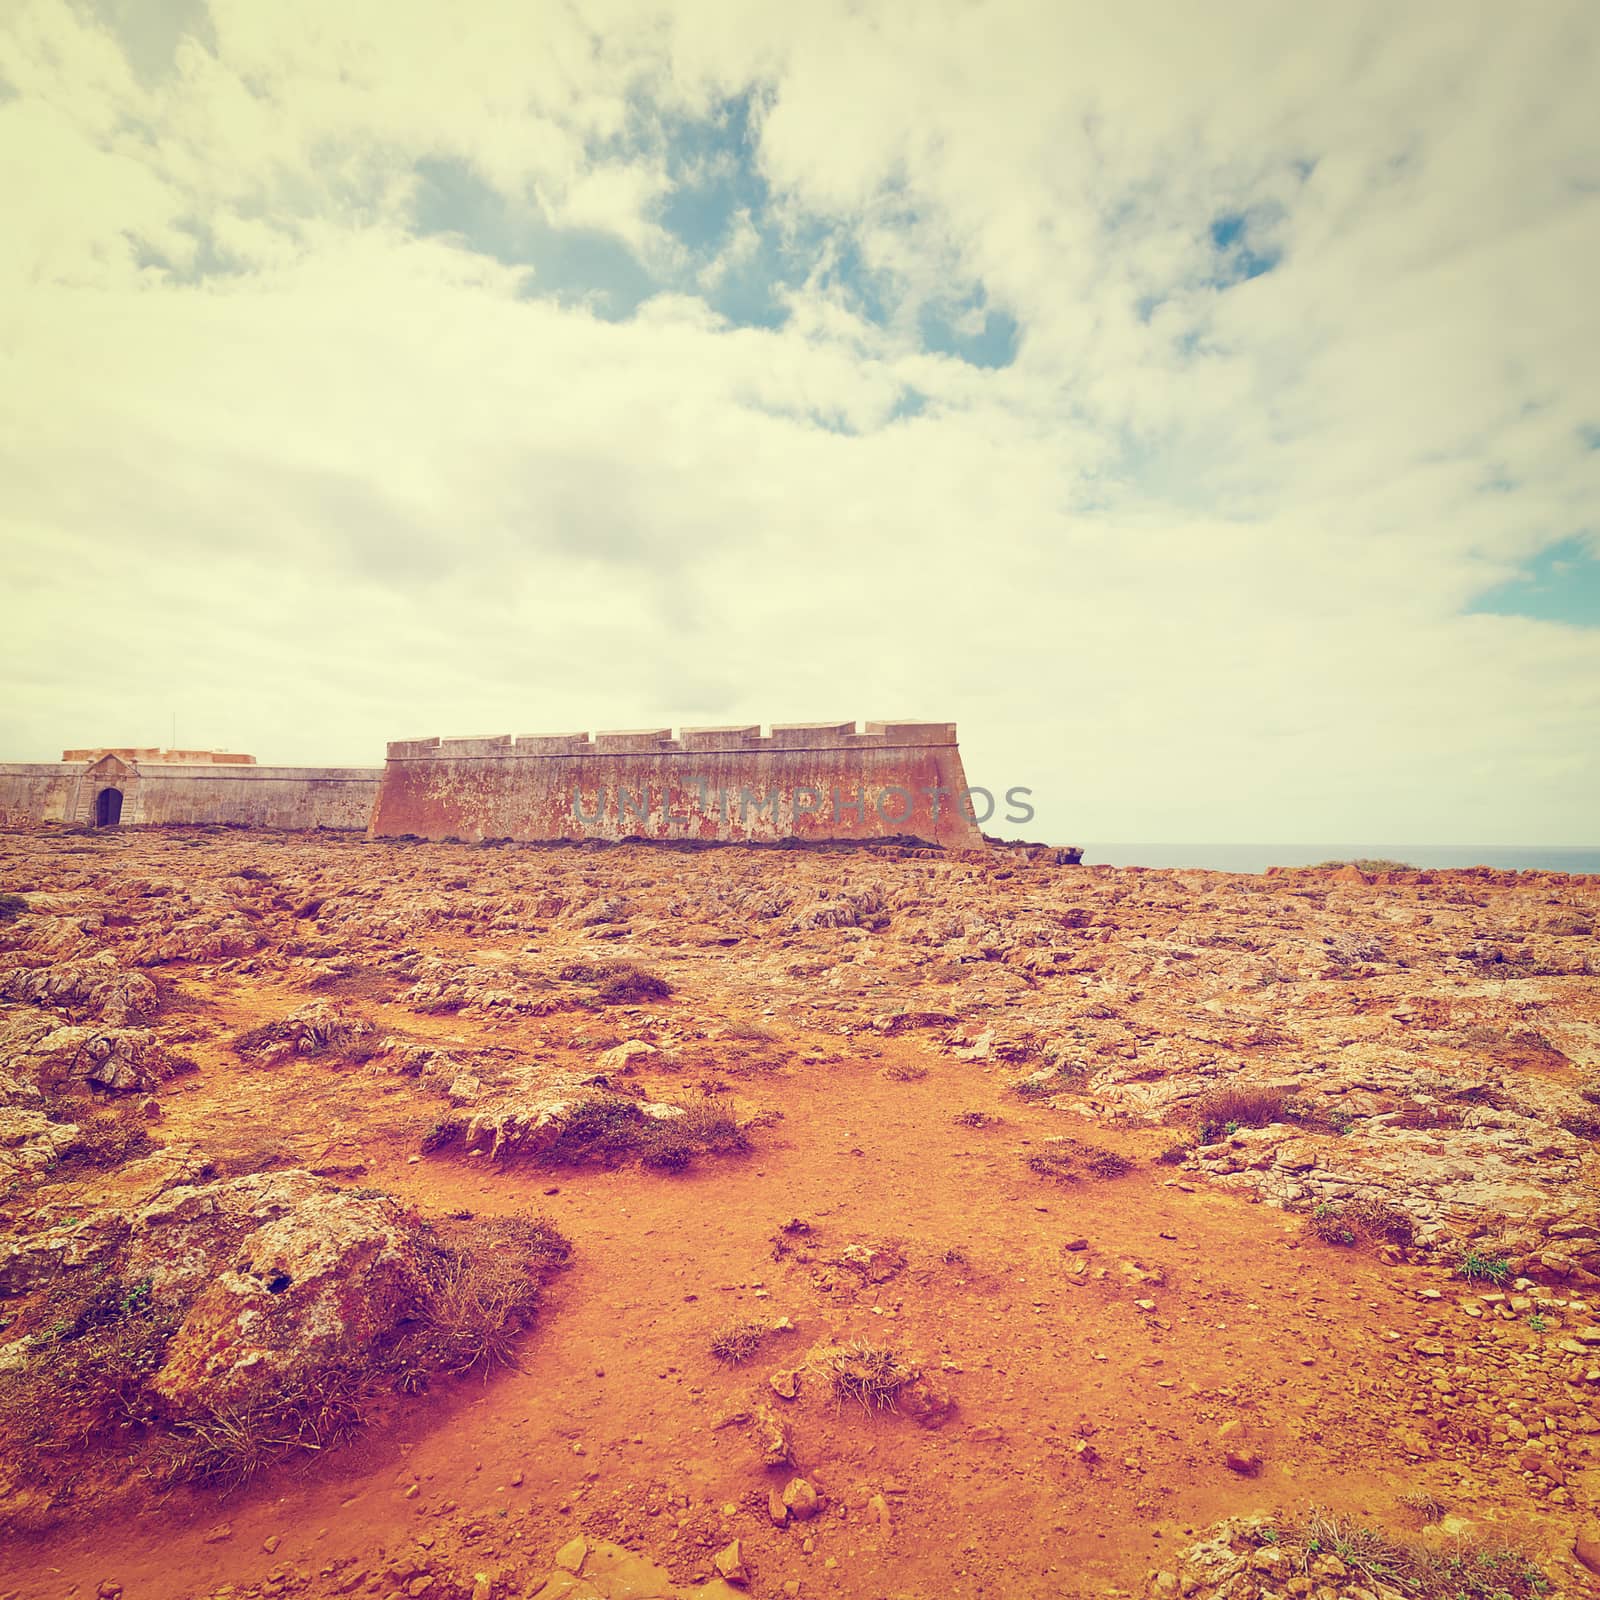 Portuguese Fortress Sagres on the Deserted Beach of the Atlantic Ocean, Instagram Effect